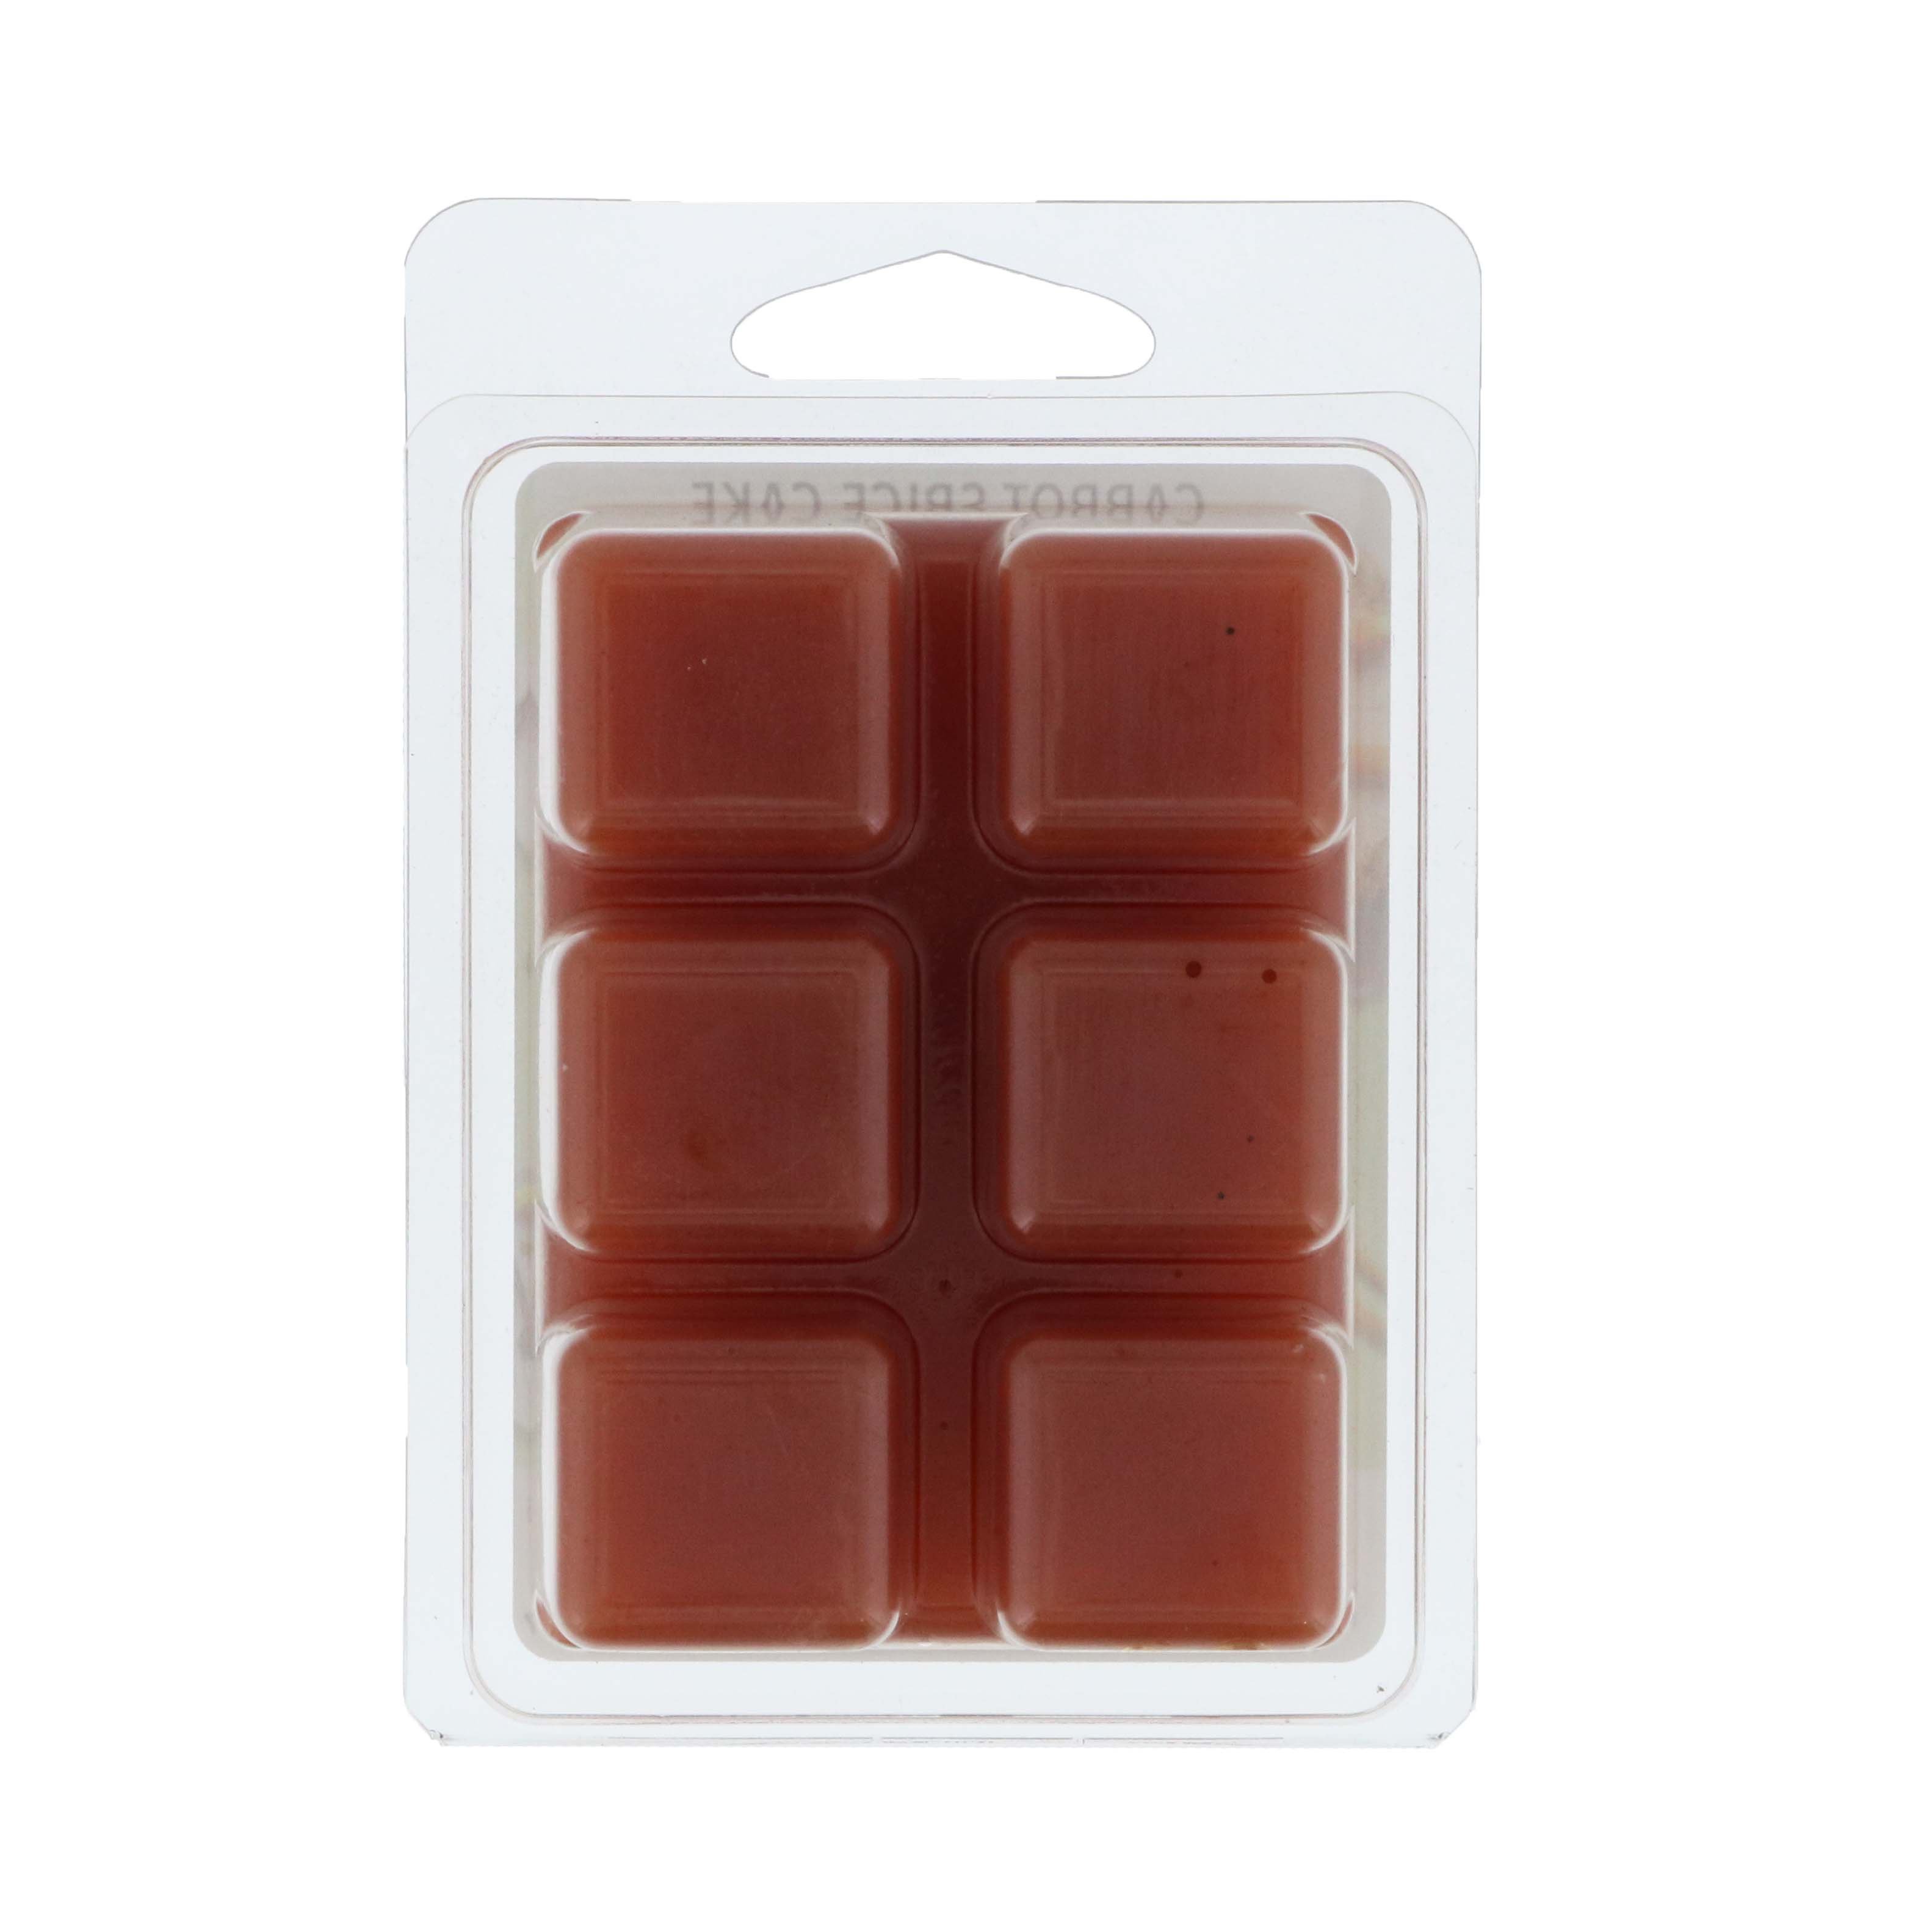 Fusion Sugar Pine Scented Wax Cubes, 6 Ct - Shop Scented Oils & Wax at H-E-B